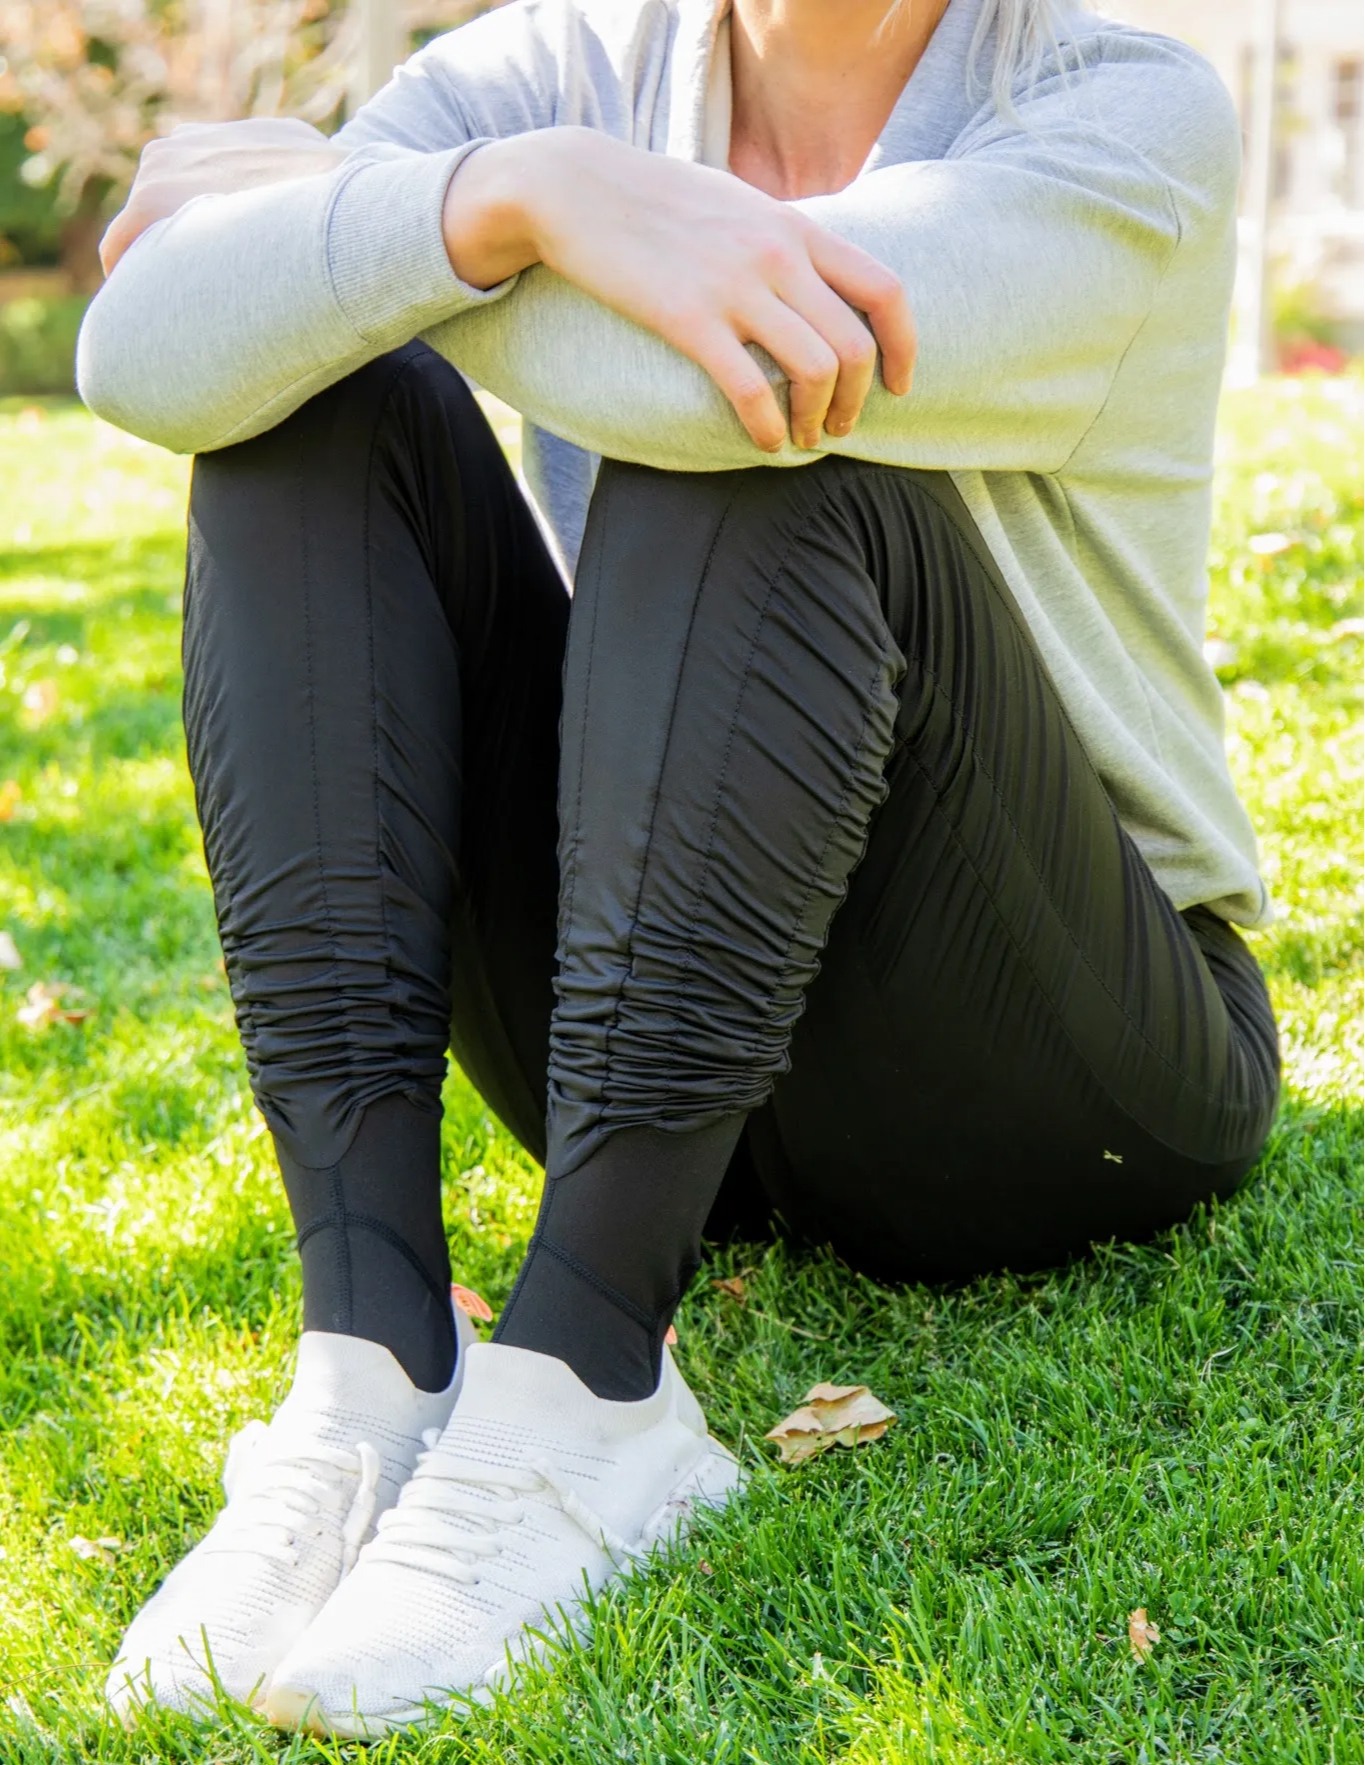 Why use resistance band pants? – AGOGIE